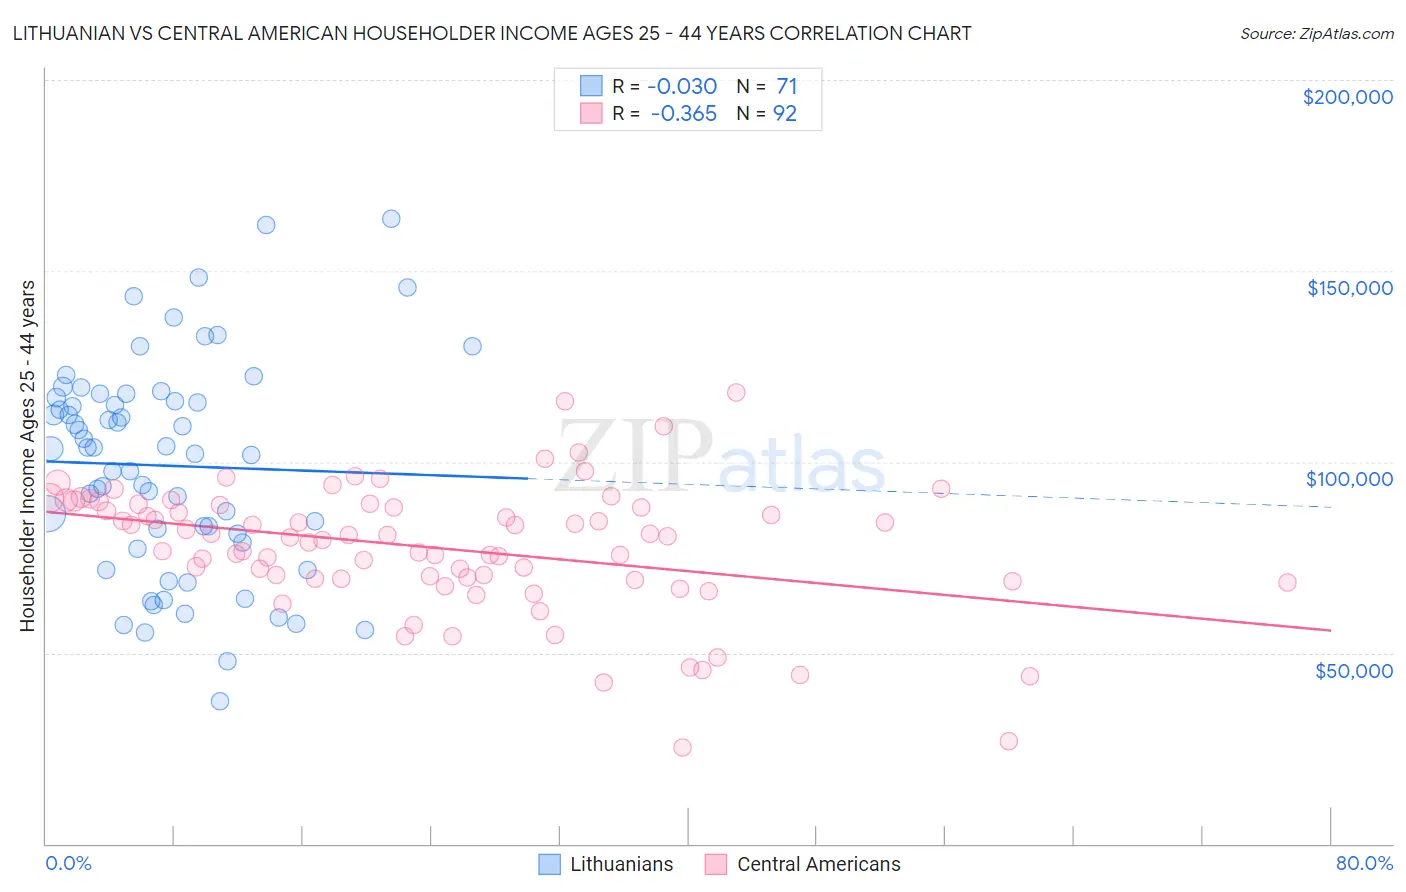 Lithuanian vs Central American Householder Income Ages 25 - 44 years